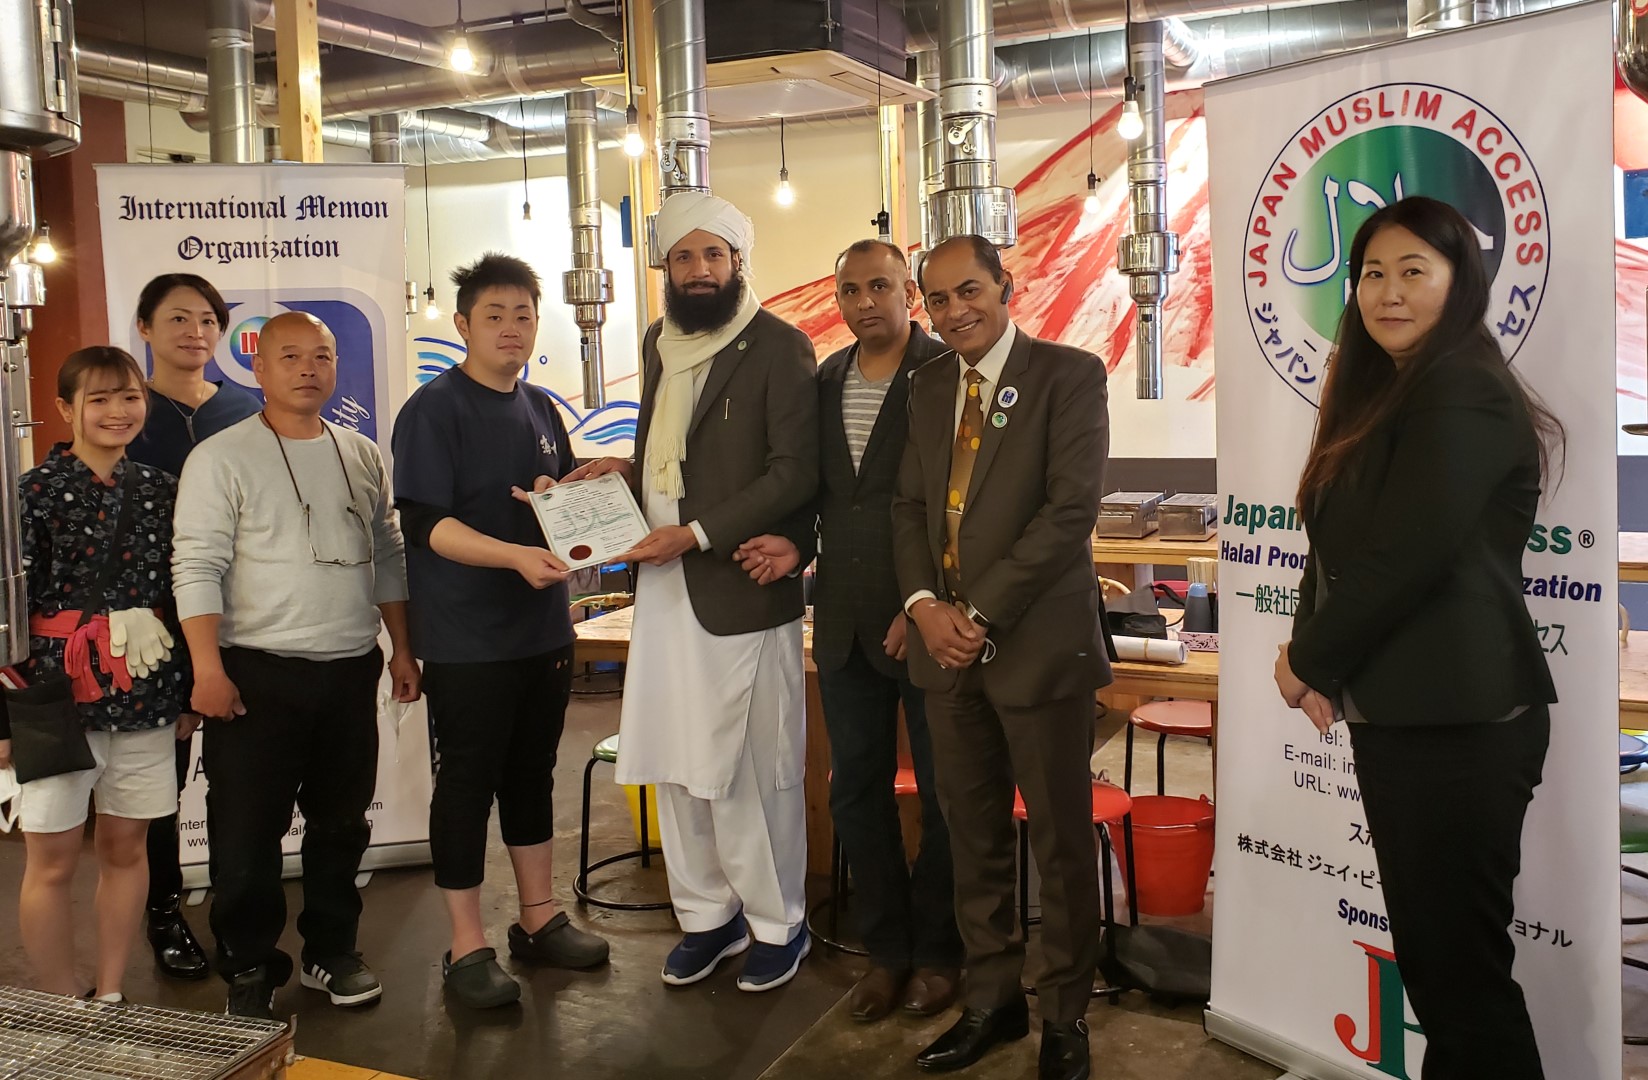 A big achievement to arrange Prayer place for Muslims. Also they have acquired JMA Halal Certificate! at Numazu Hamayaki Center Amagoya